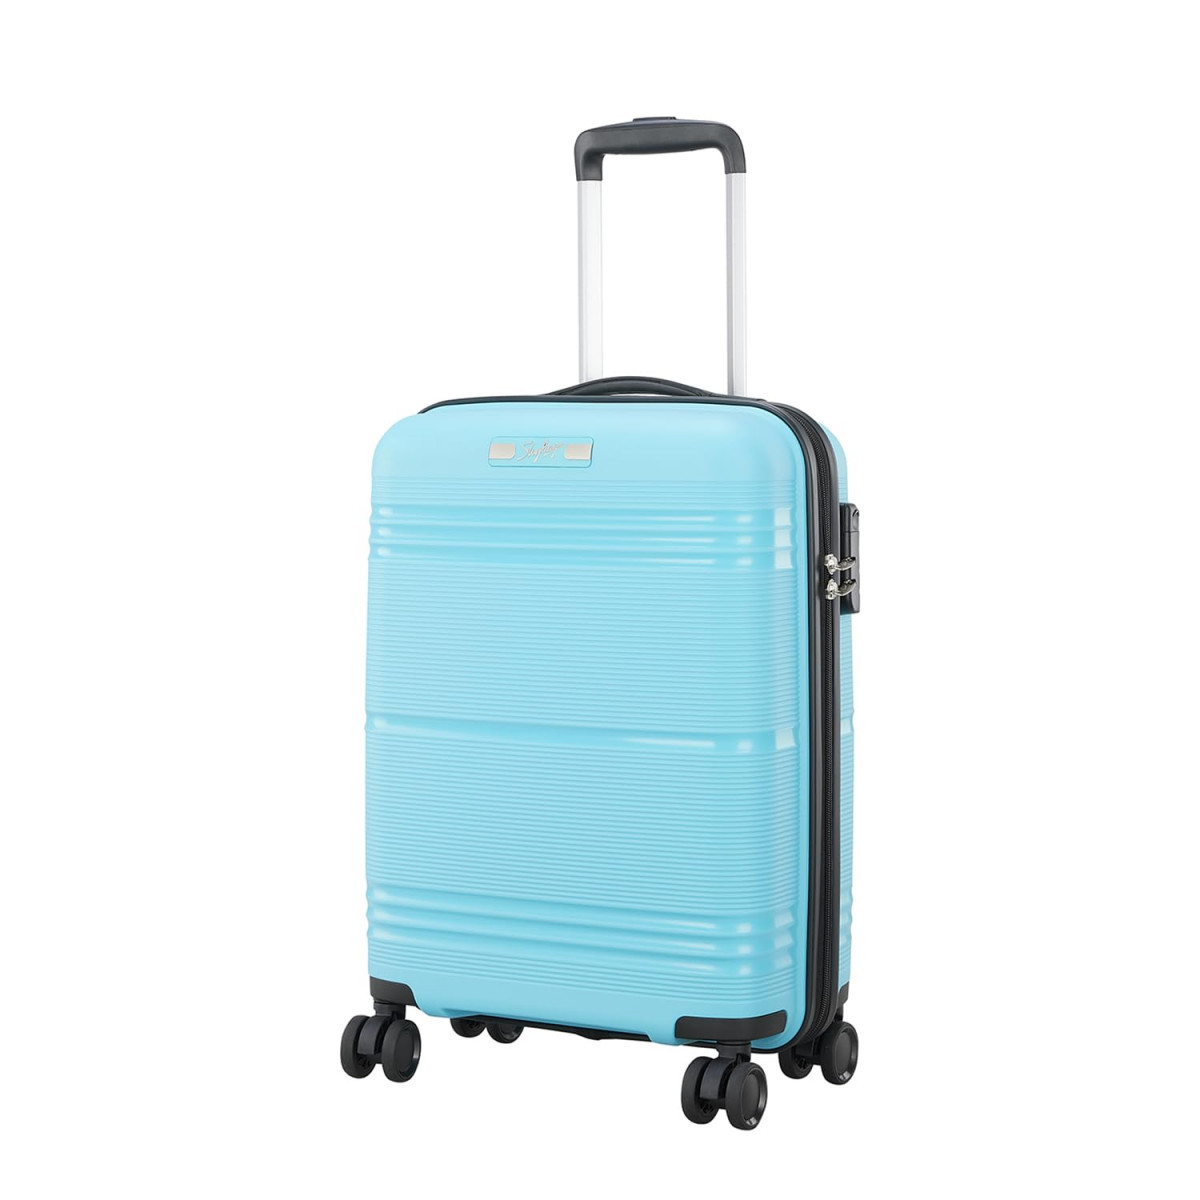 Skybags Focus 8WN Strolly Cabin 360 55CmTrolley Bag SpeedWheel Suitcase For Travel